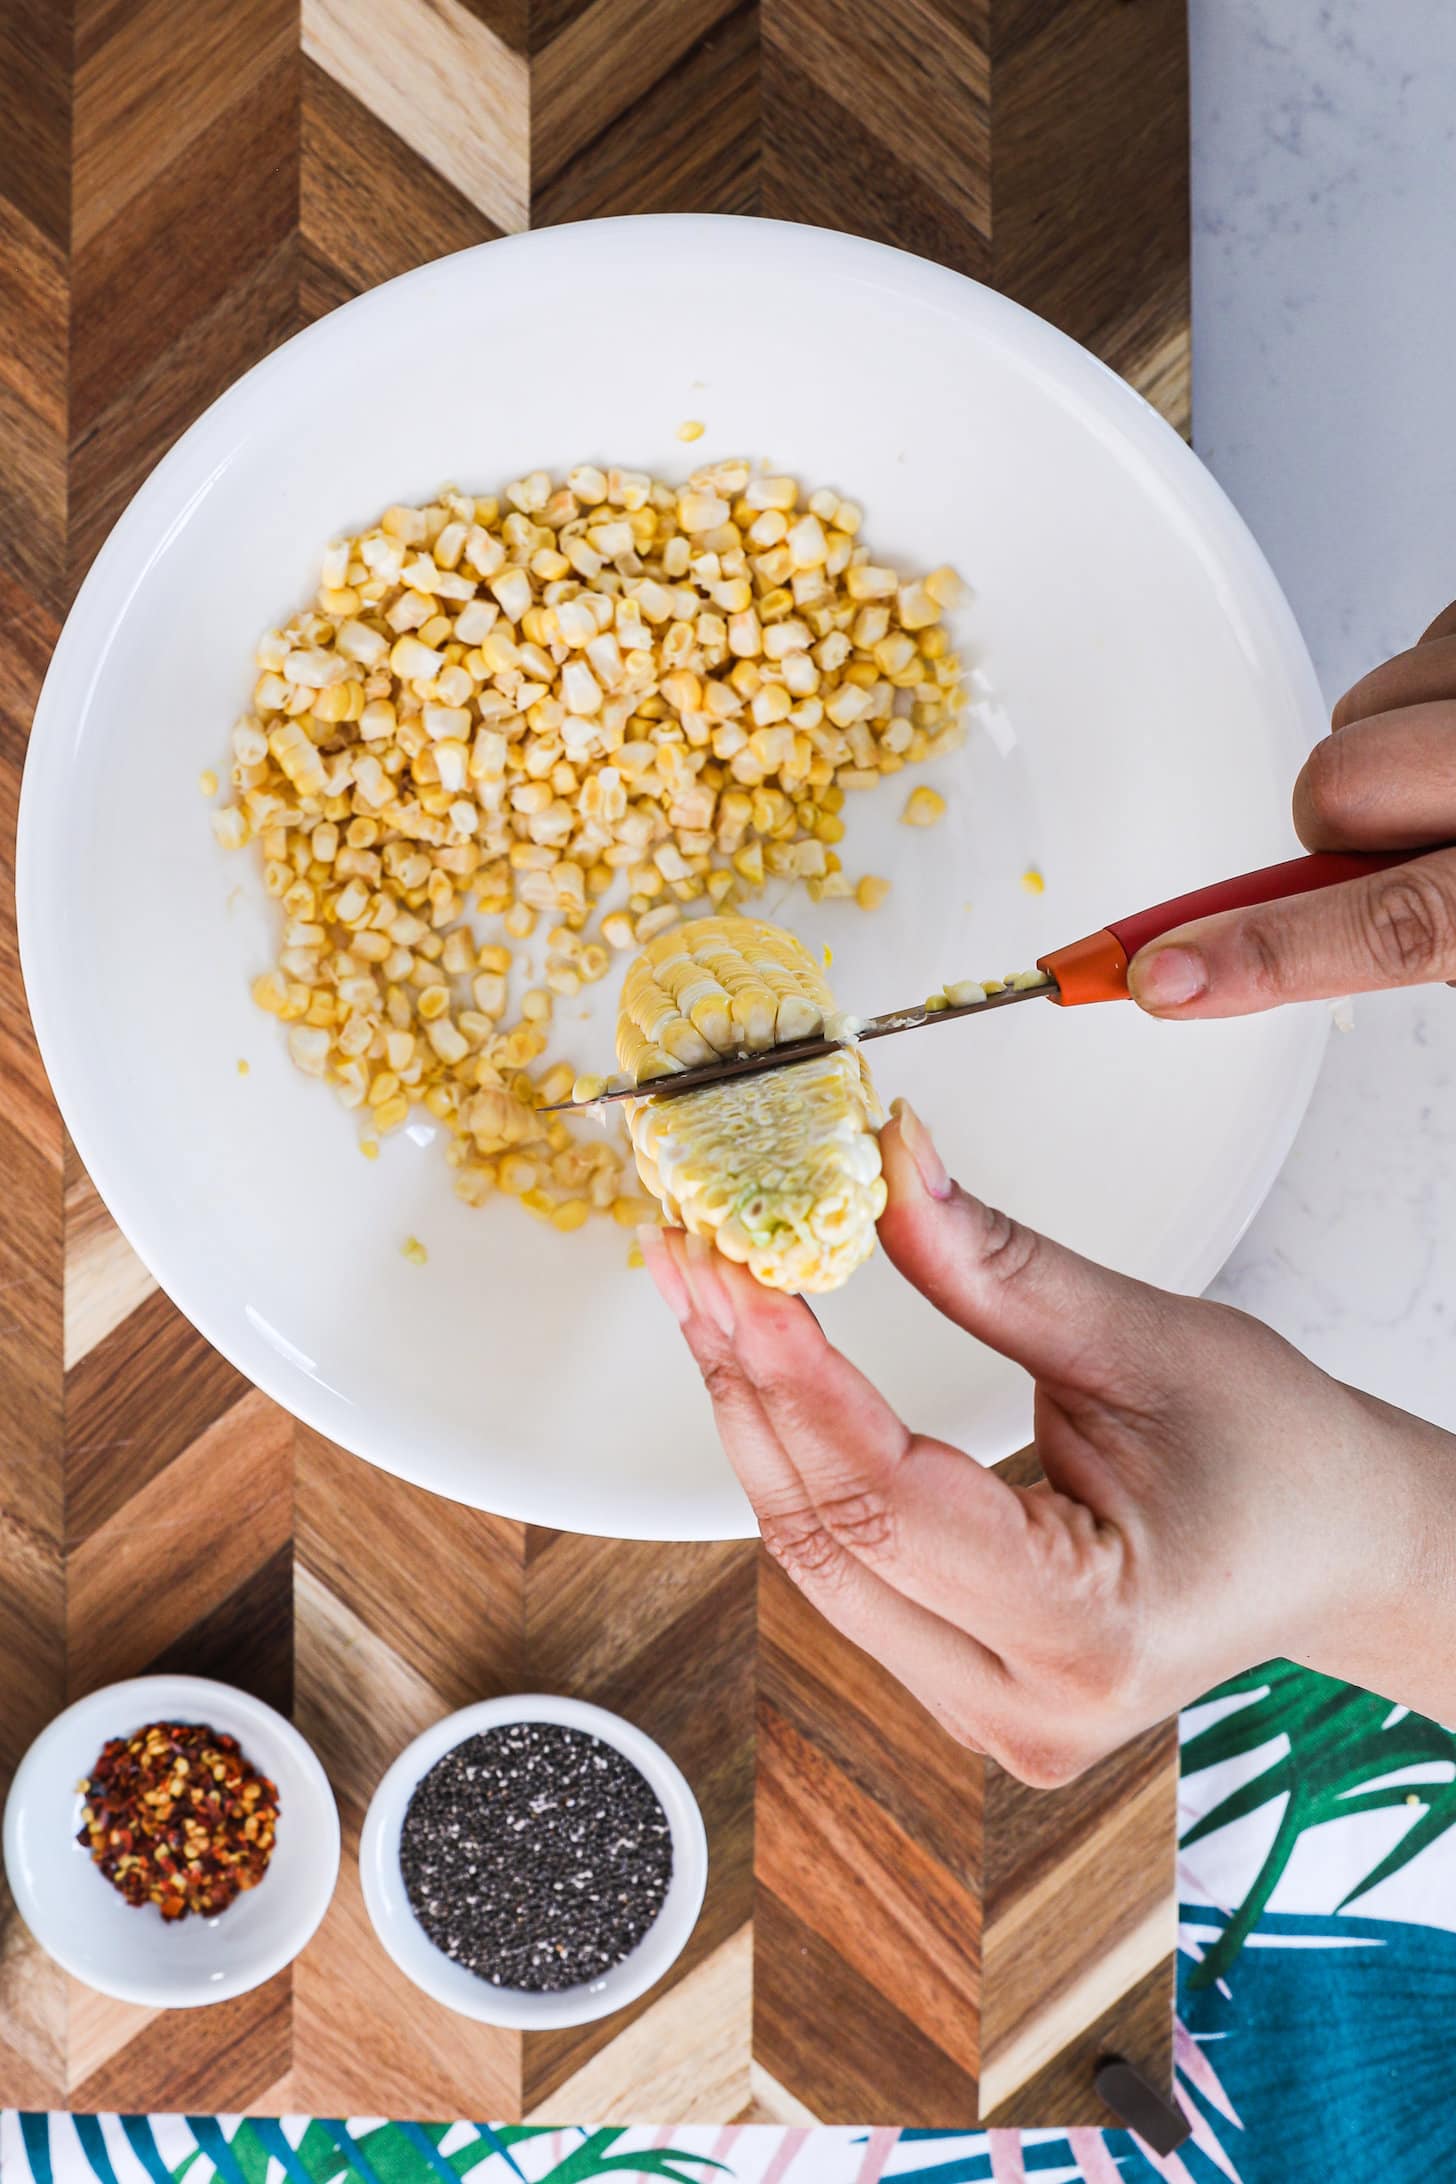 a hand holding a knife and cutting the kernels off of a cob of corn into a white bow.